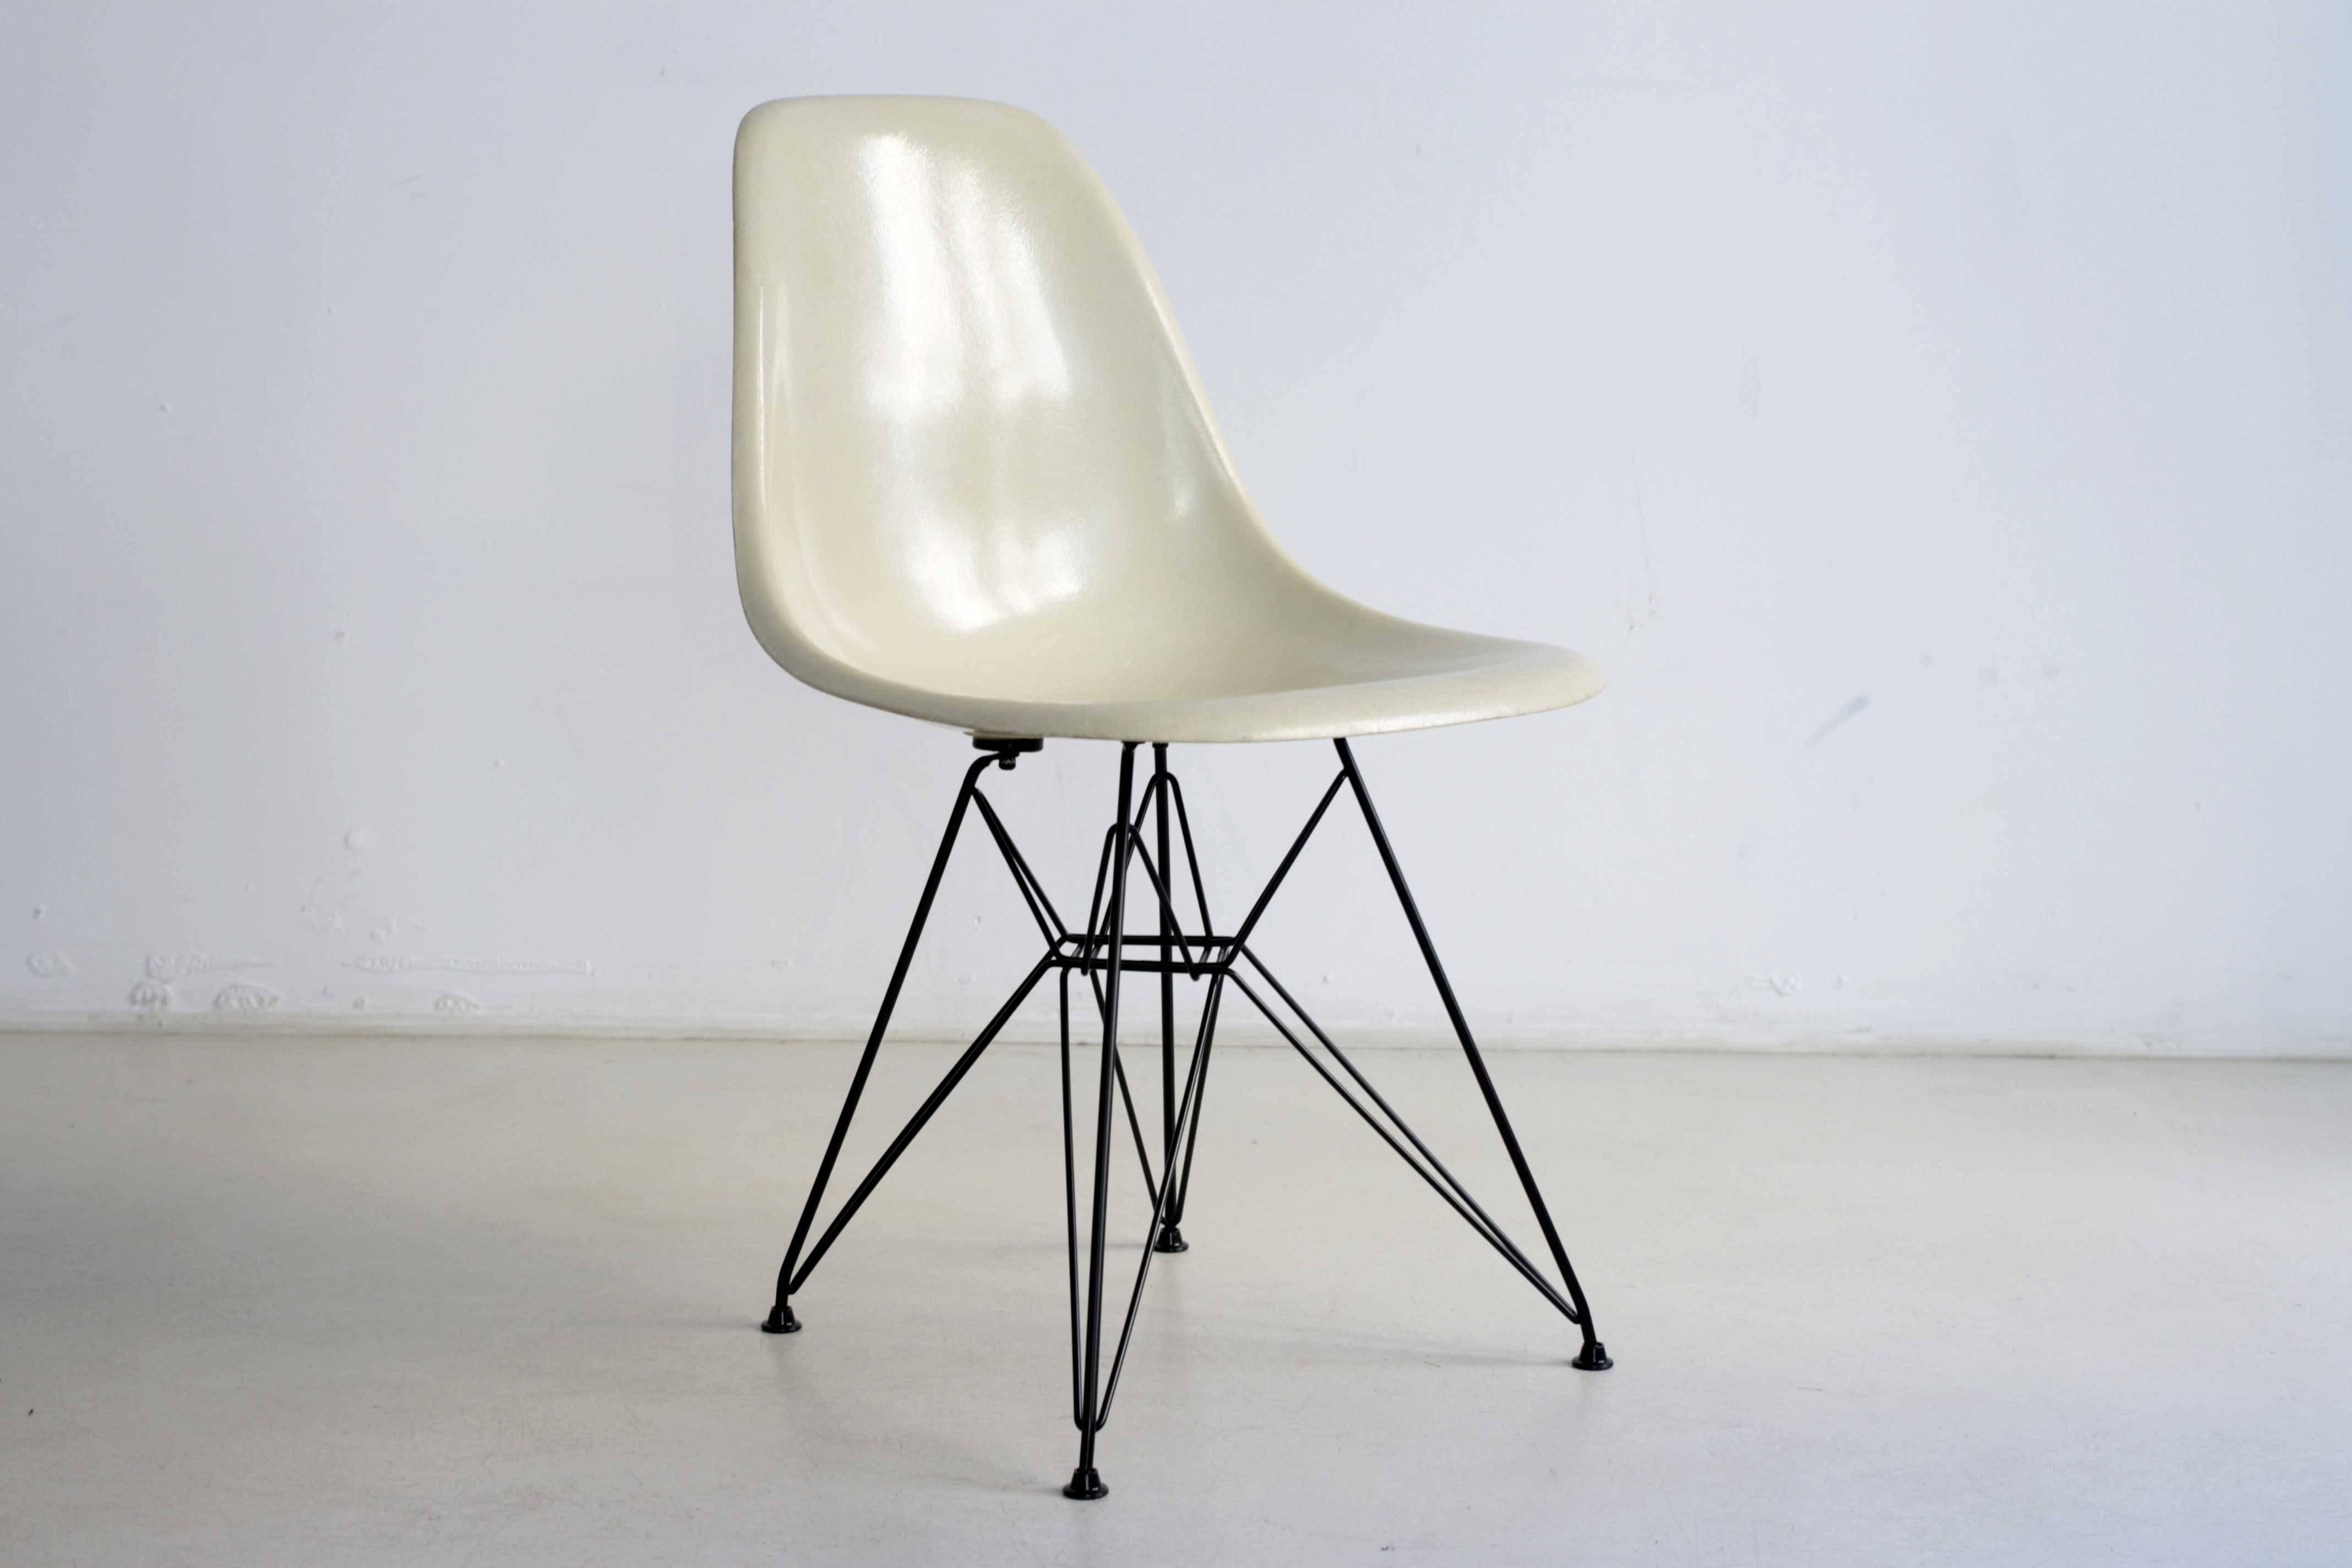 Set of four fiberglass chairs by Charles Eames for Herman Miller. Bases from Modern Conscience, recommended by Herman Miller for the Restauration and preservation of vintage Eames seating.